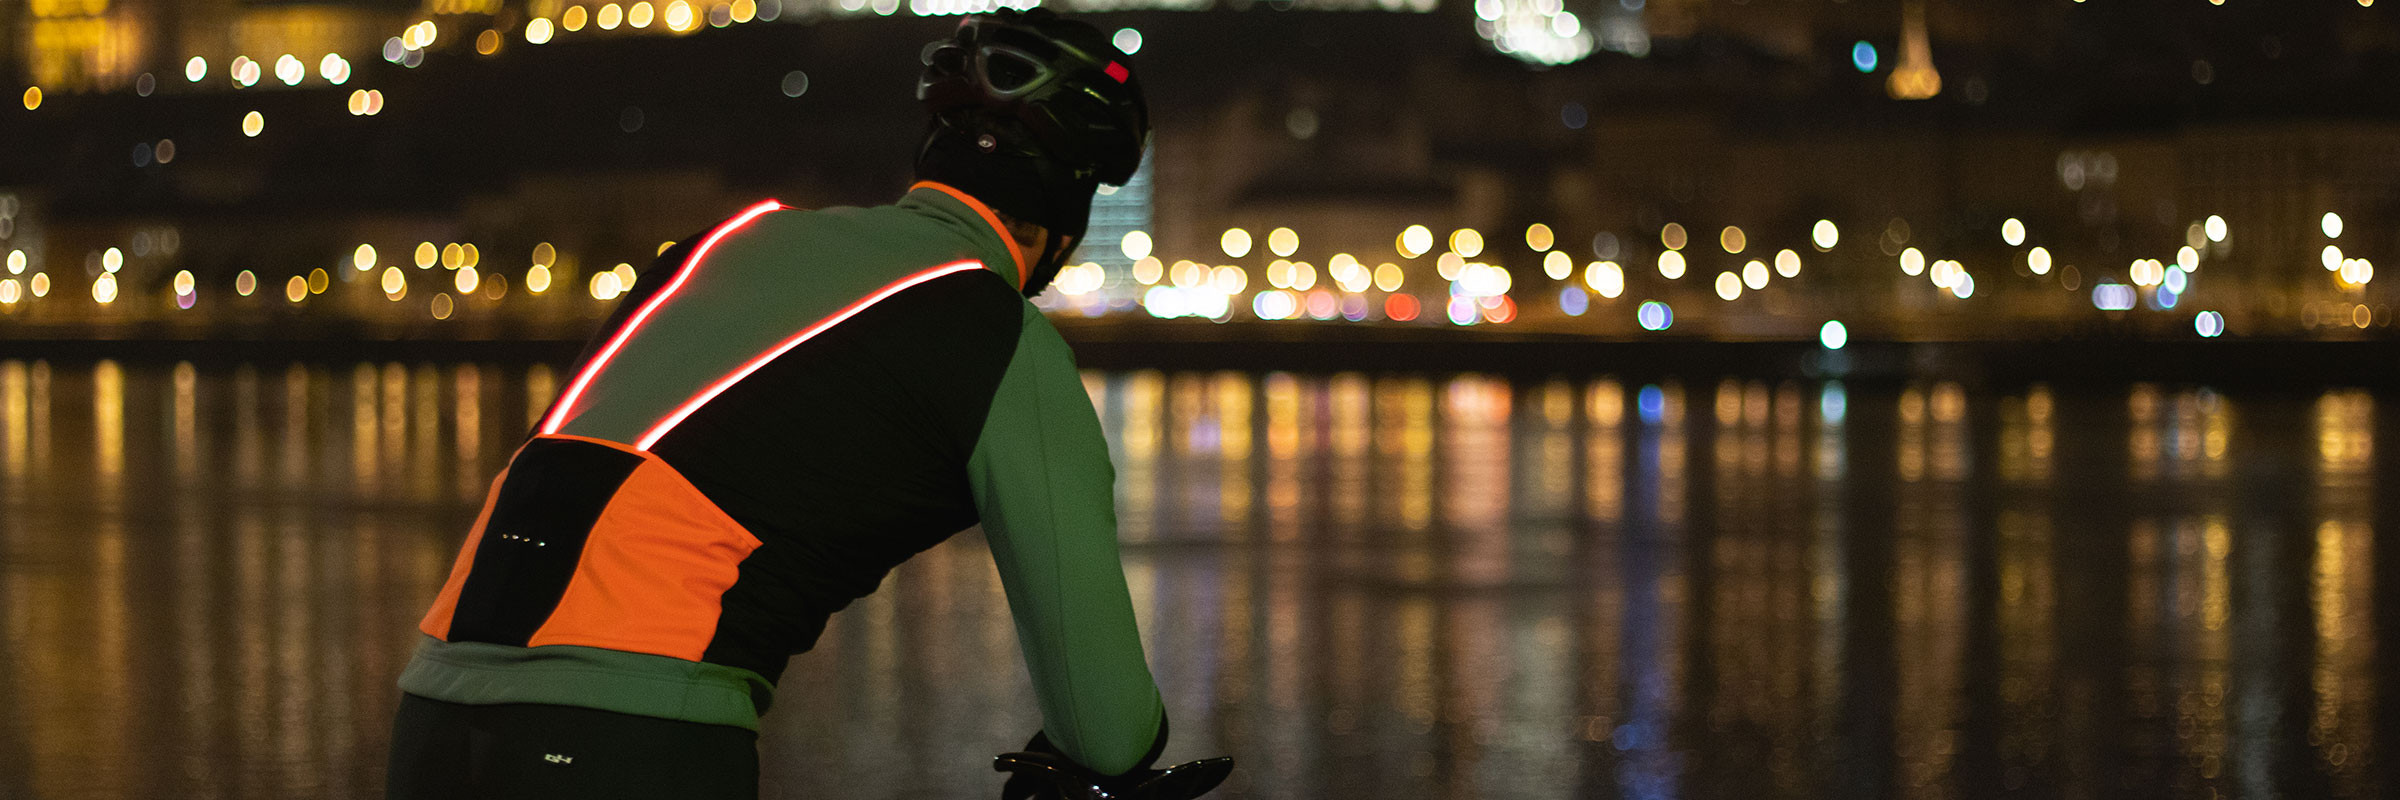 REFLECTIVE CYCLING CLOTHES - G4 Dimension